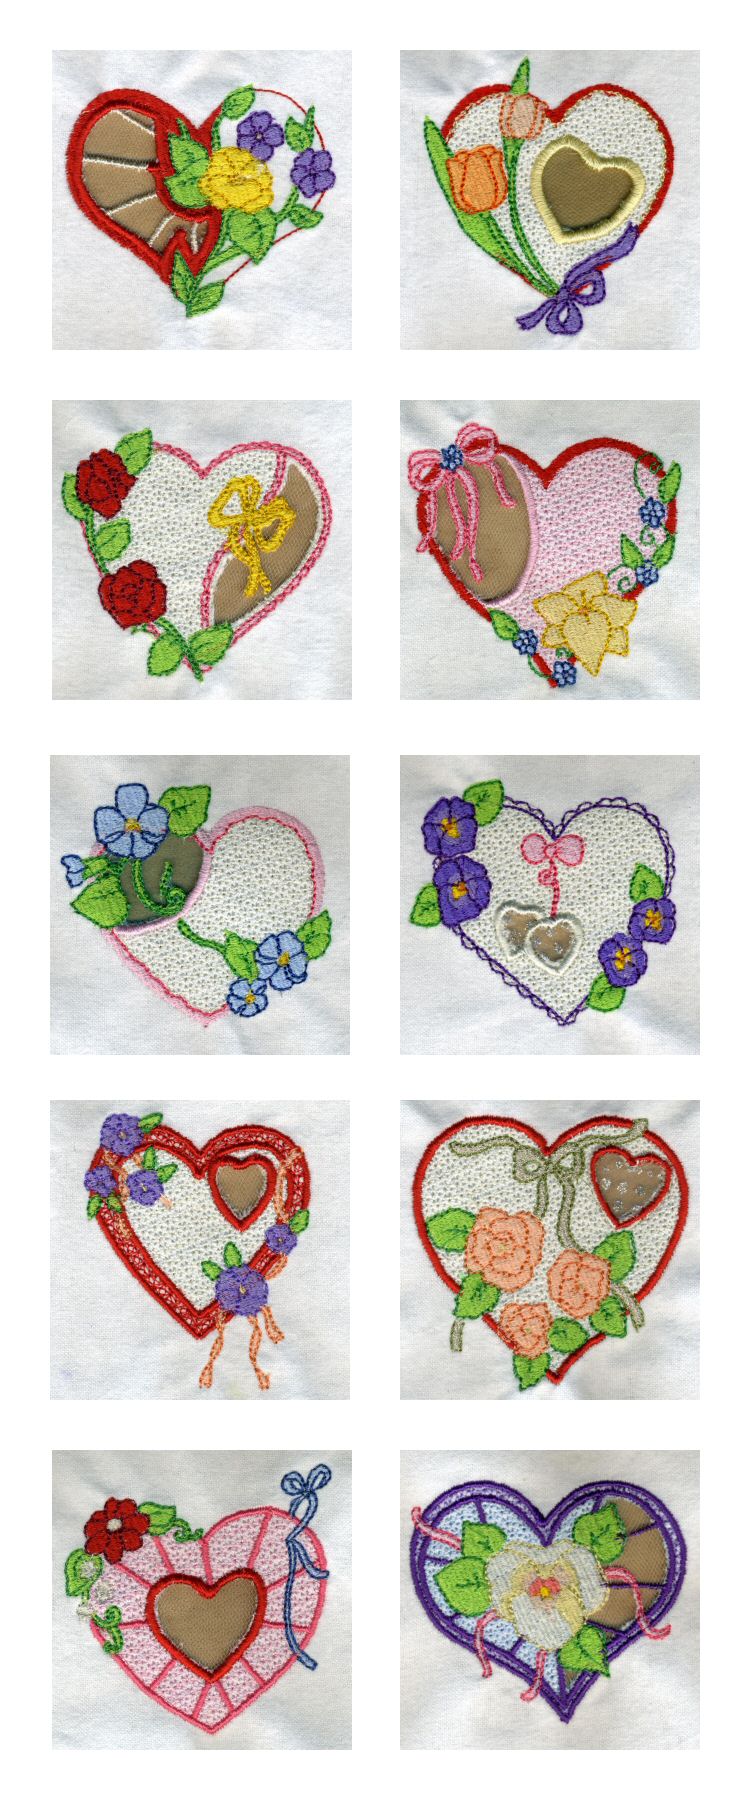 How to Get Started Creating Cutwork Embroidery - Yahoo! Voices